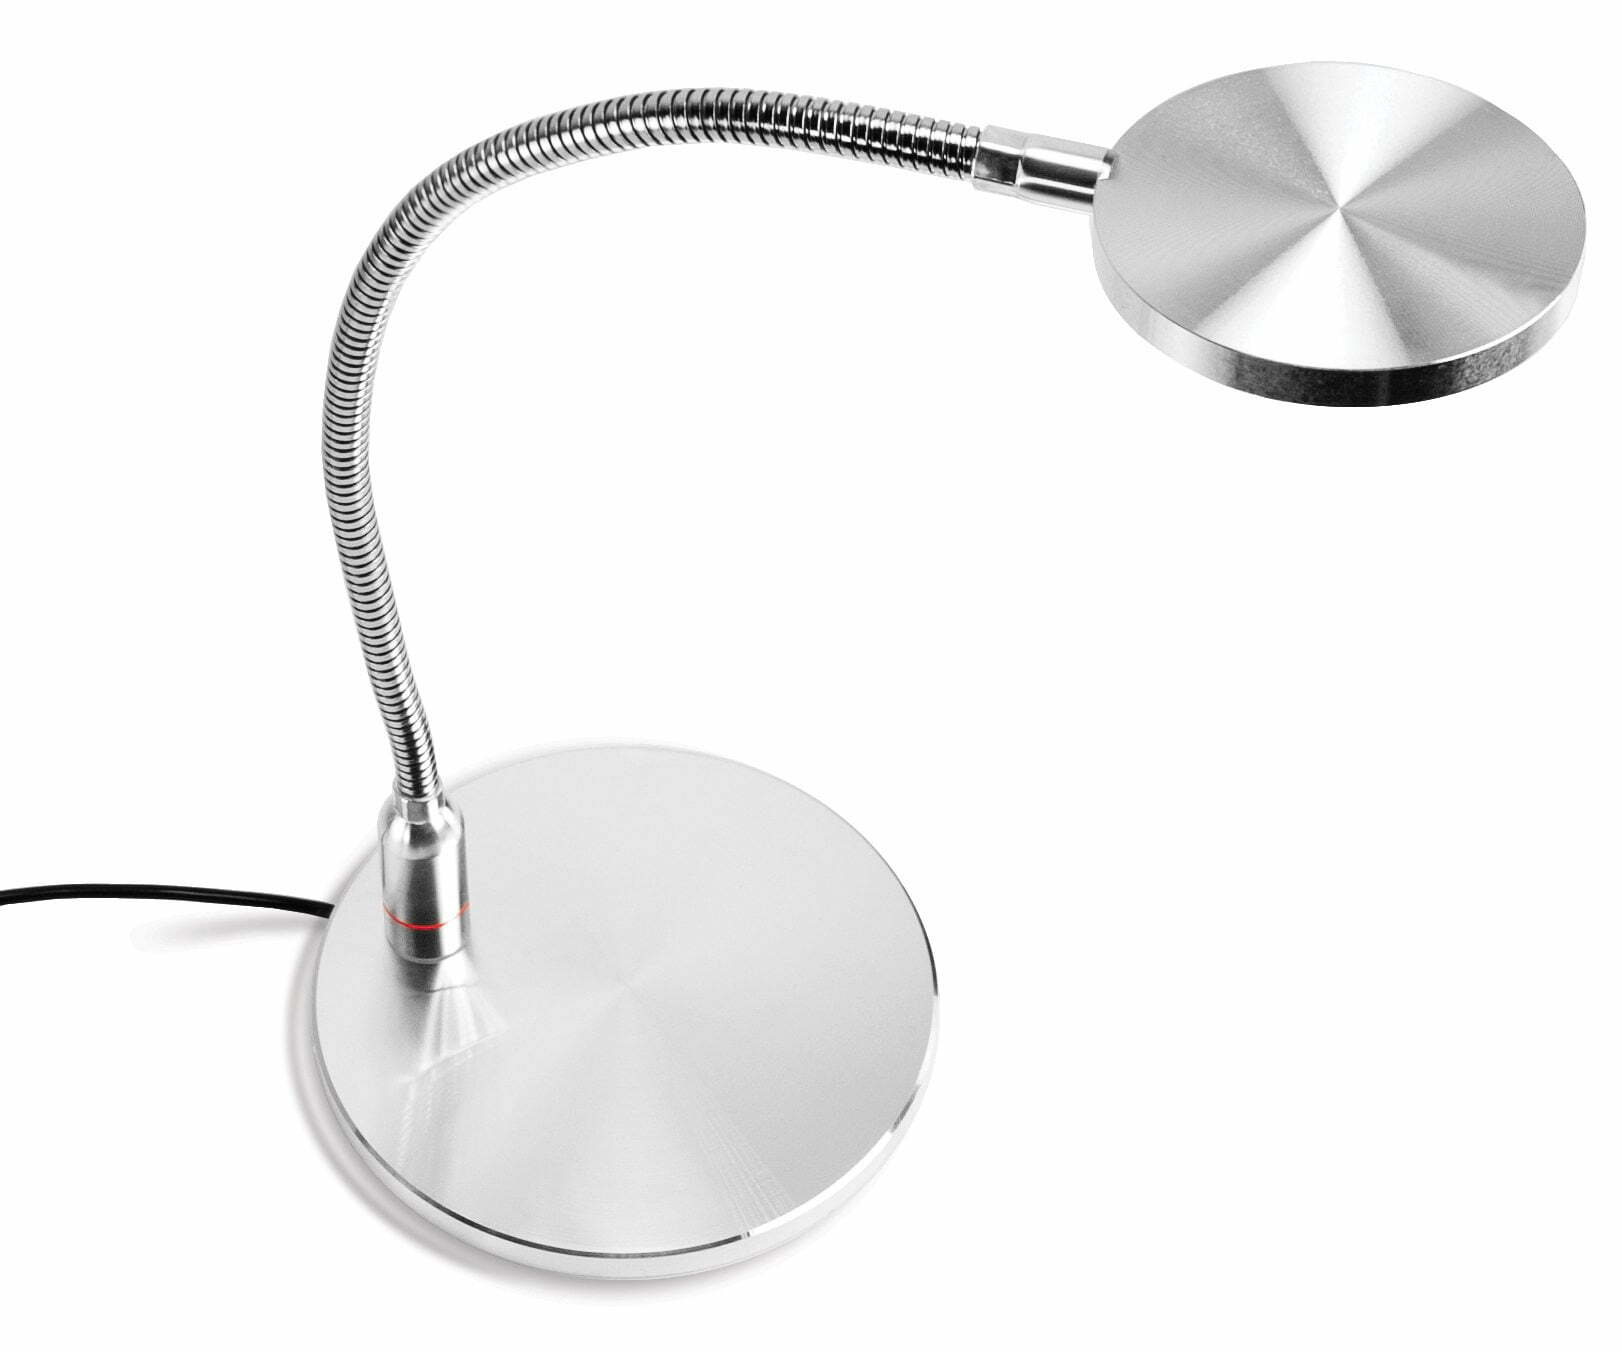 NuGreen Energy-efficient LED Desk Lamp with Flexible Neck Review